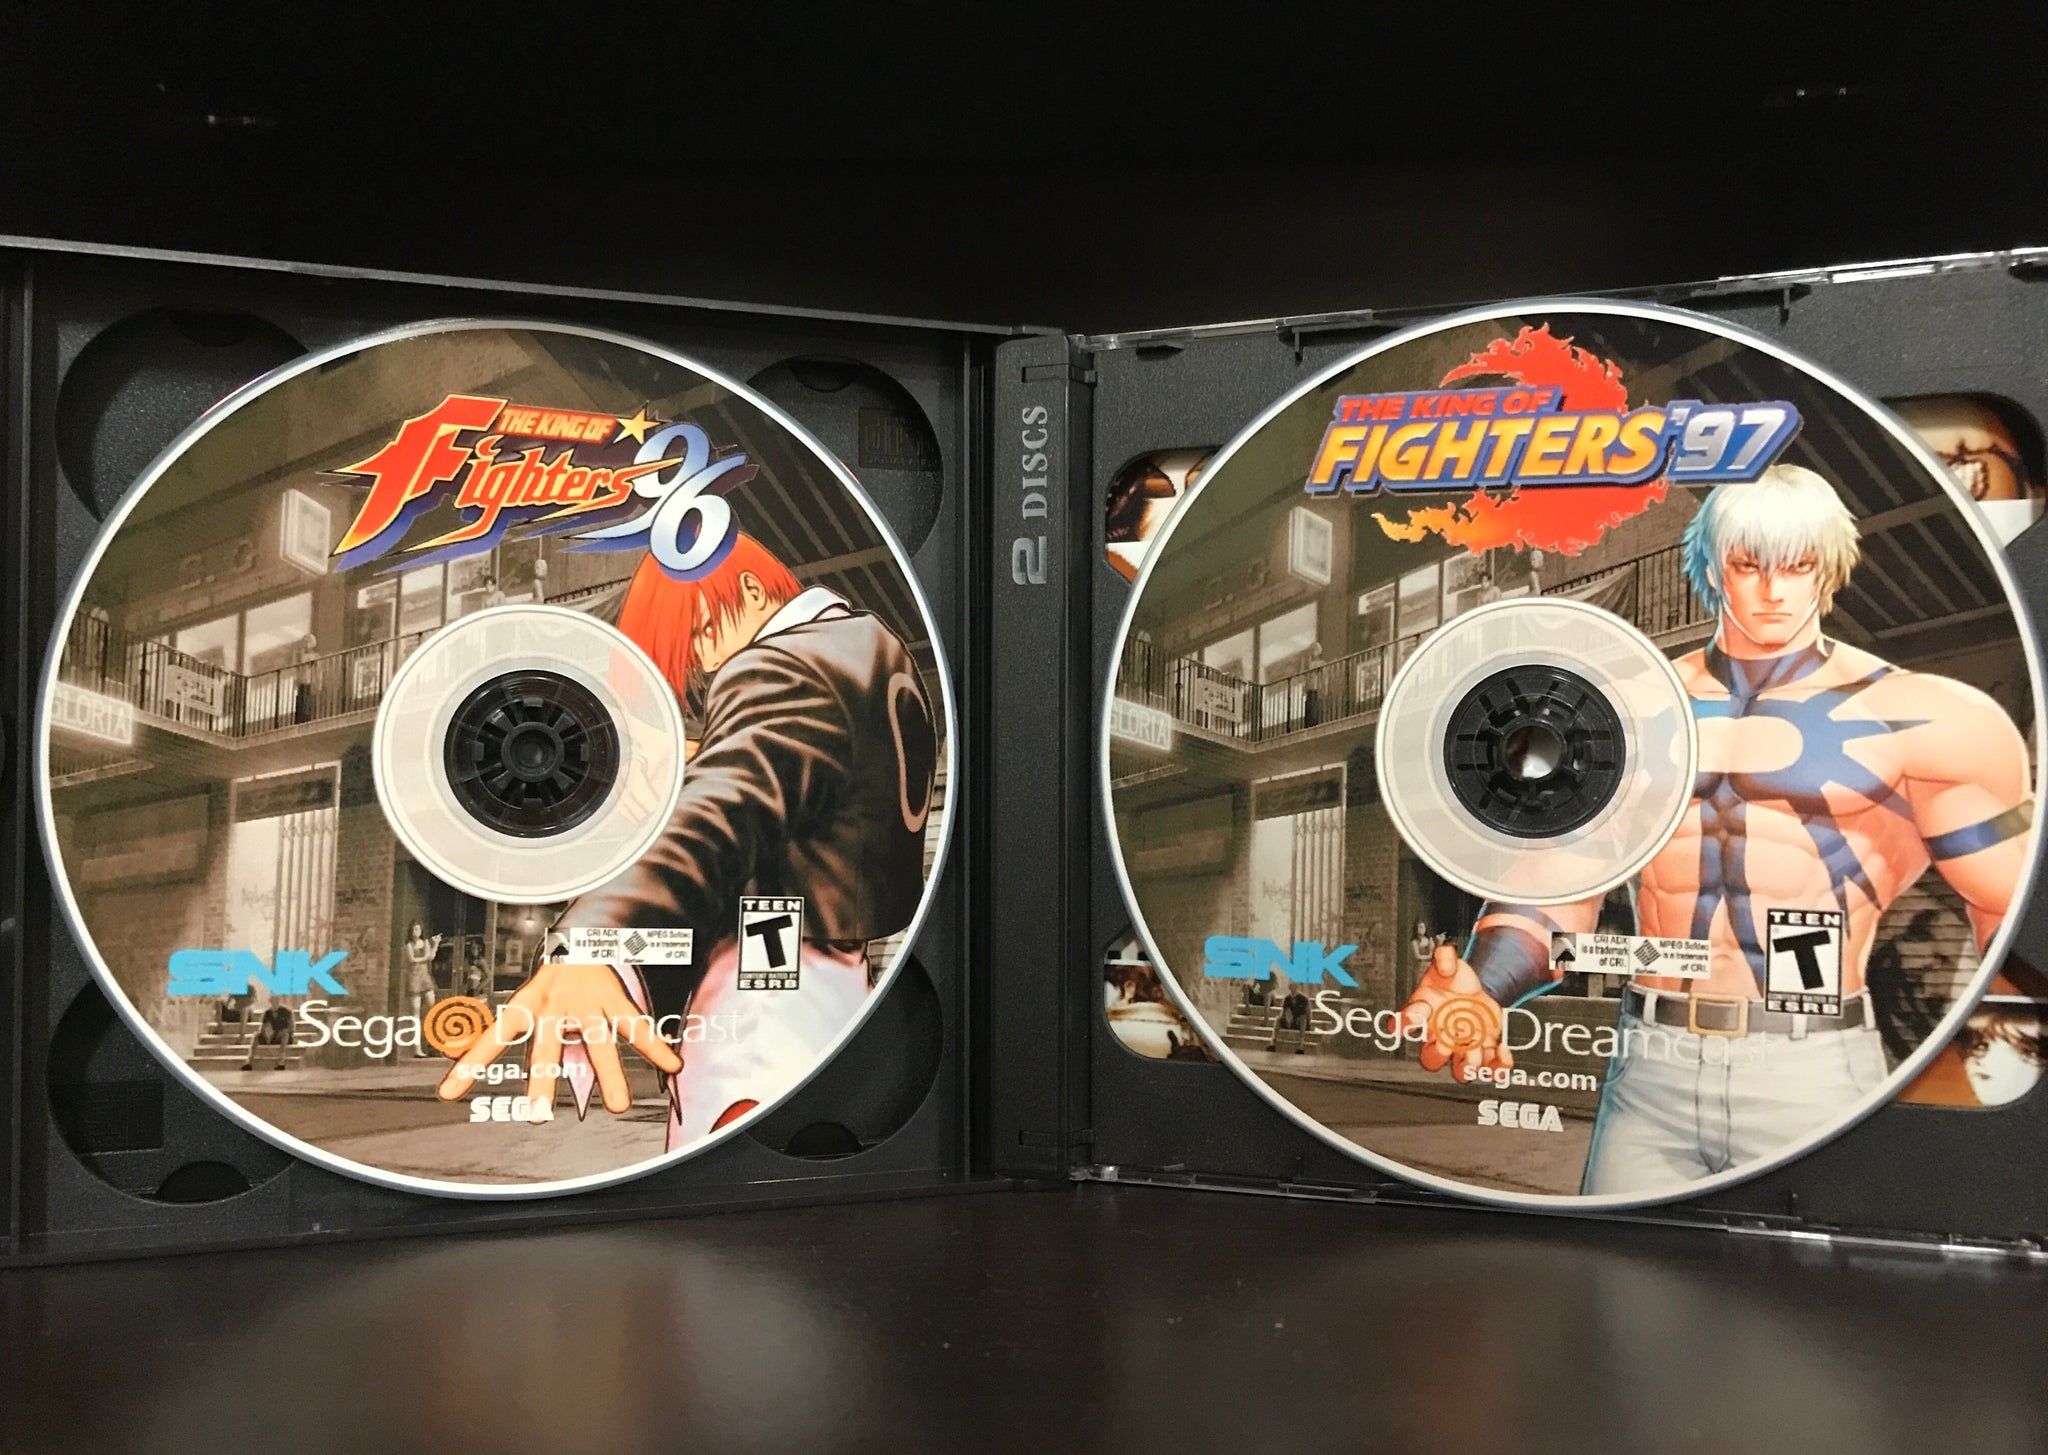 Sega Saturn The King of Fighters 97 with RAM